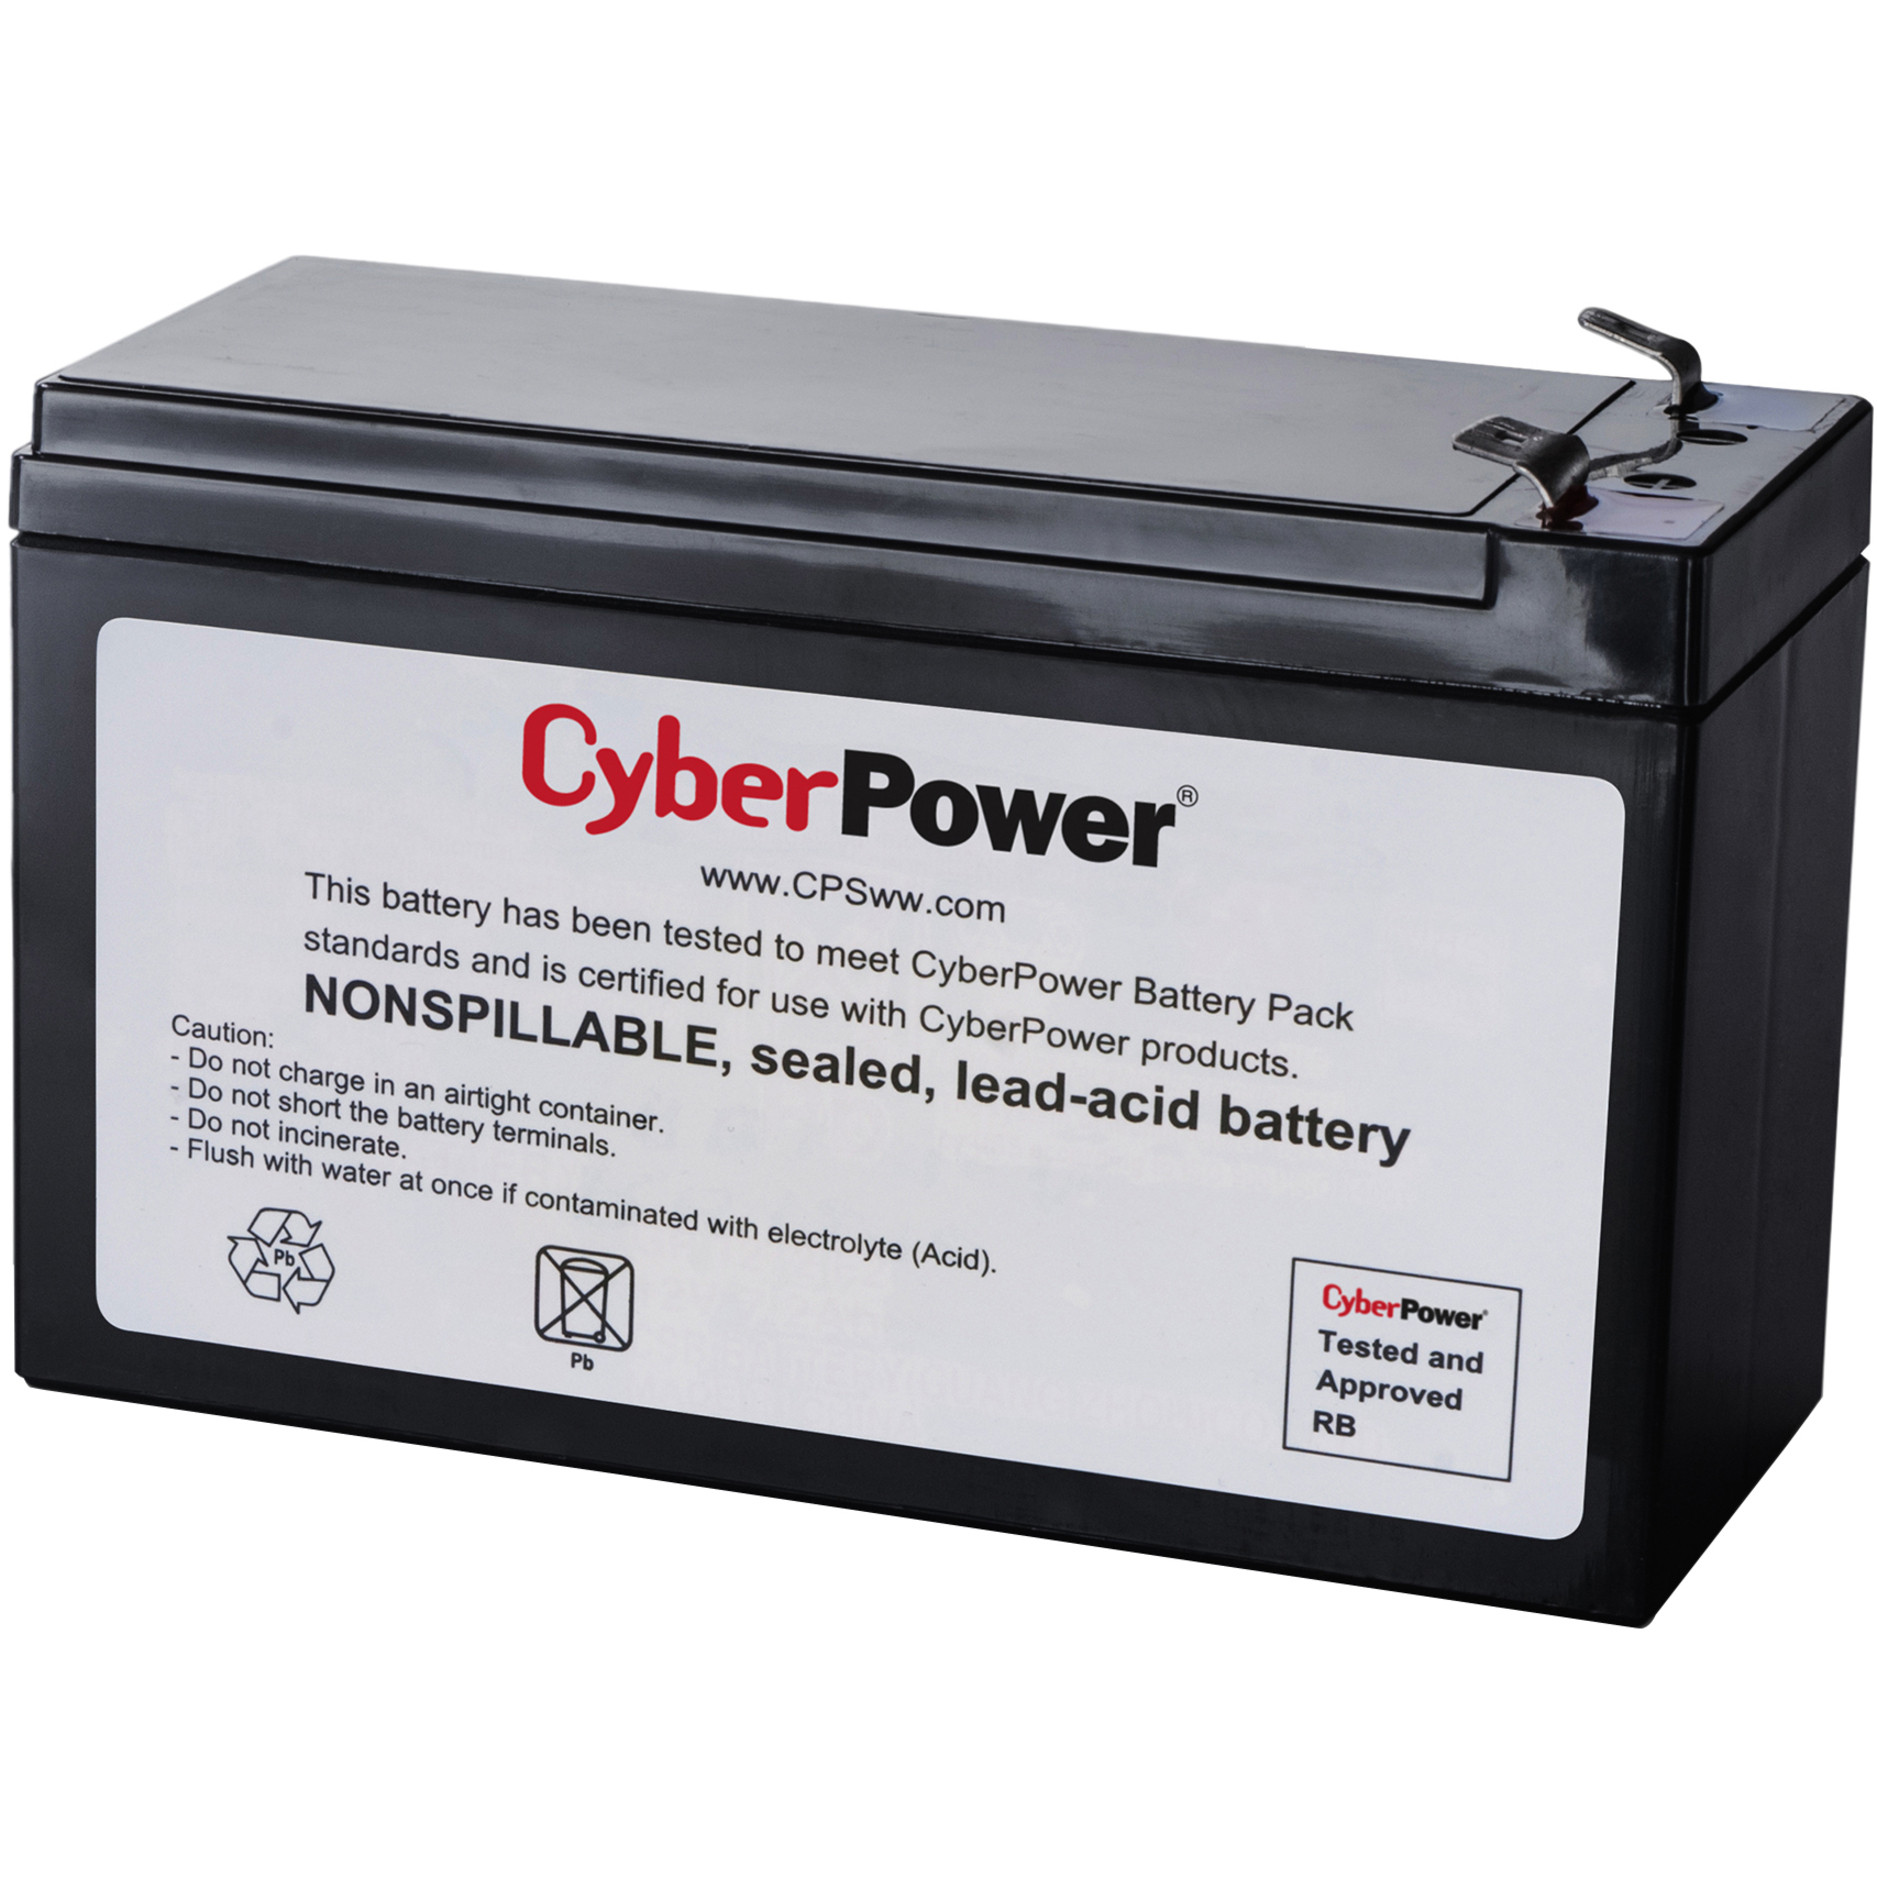 Cyber Power RB1290 Replacement Battery Cartridge1 X 12 V / 9 Ah Sealed Lead-Acid Battery, 18MO Warranty RB1290